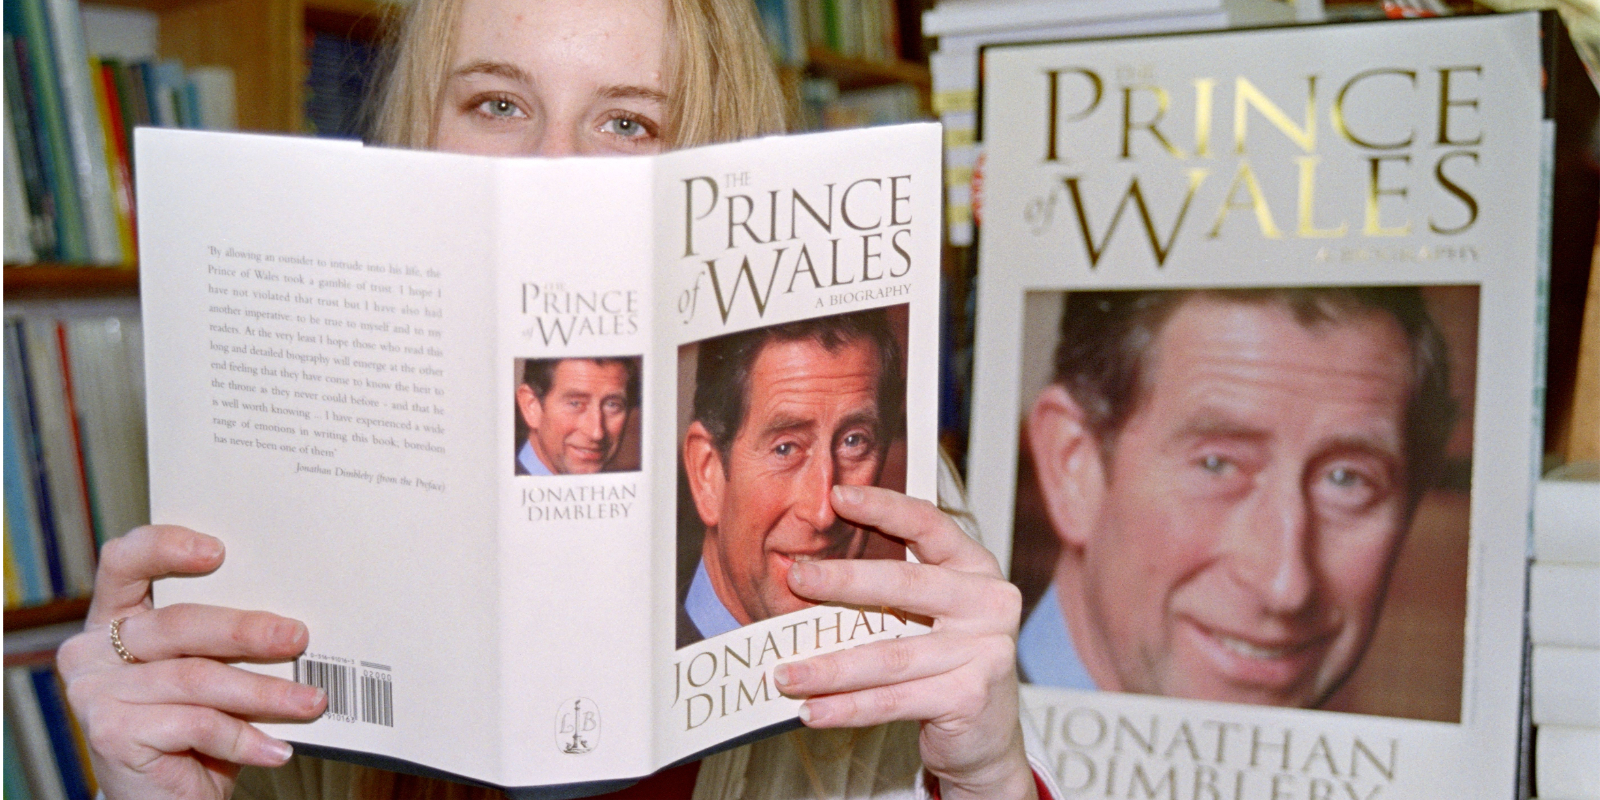 Caroline Norman of Foyles bookshop takes a look at Jonathan Dimbleby's highly publicised biography of Prince Charles, in London on November 1, 1994.